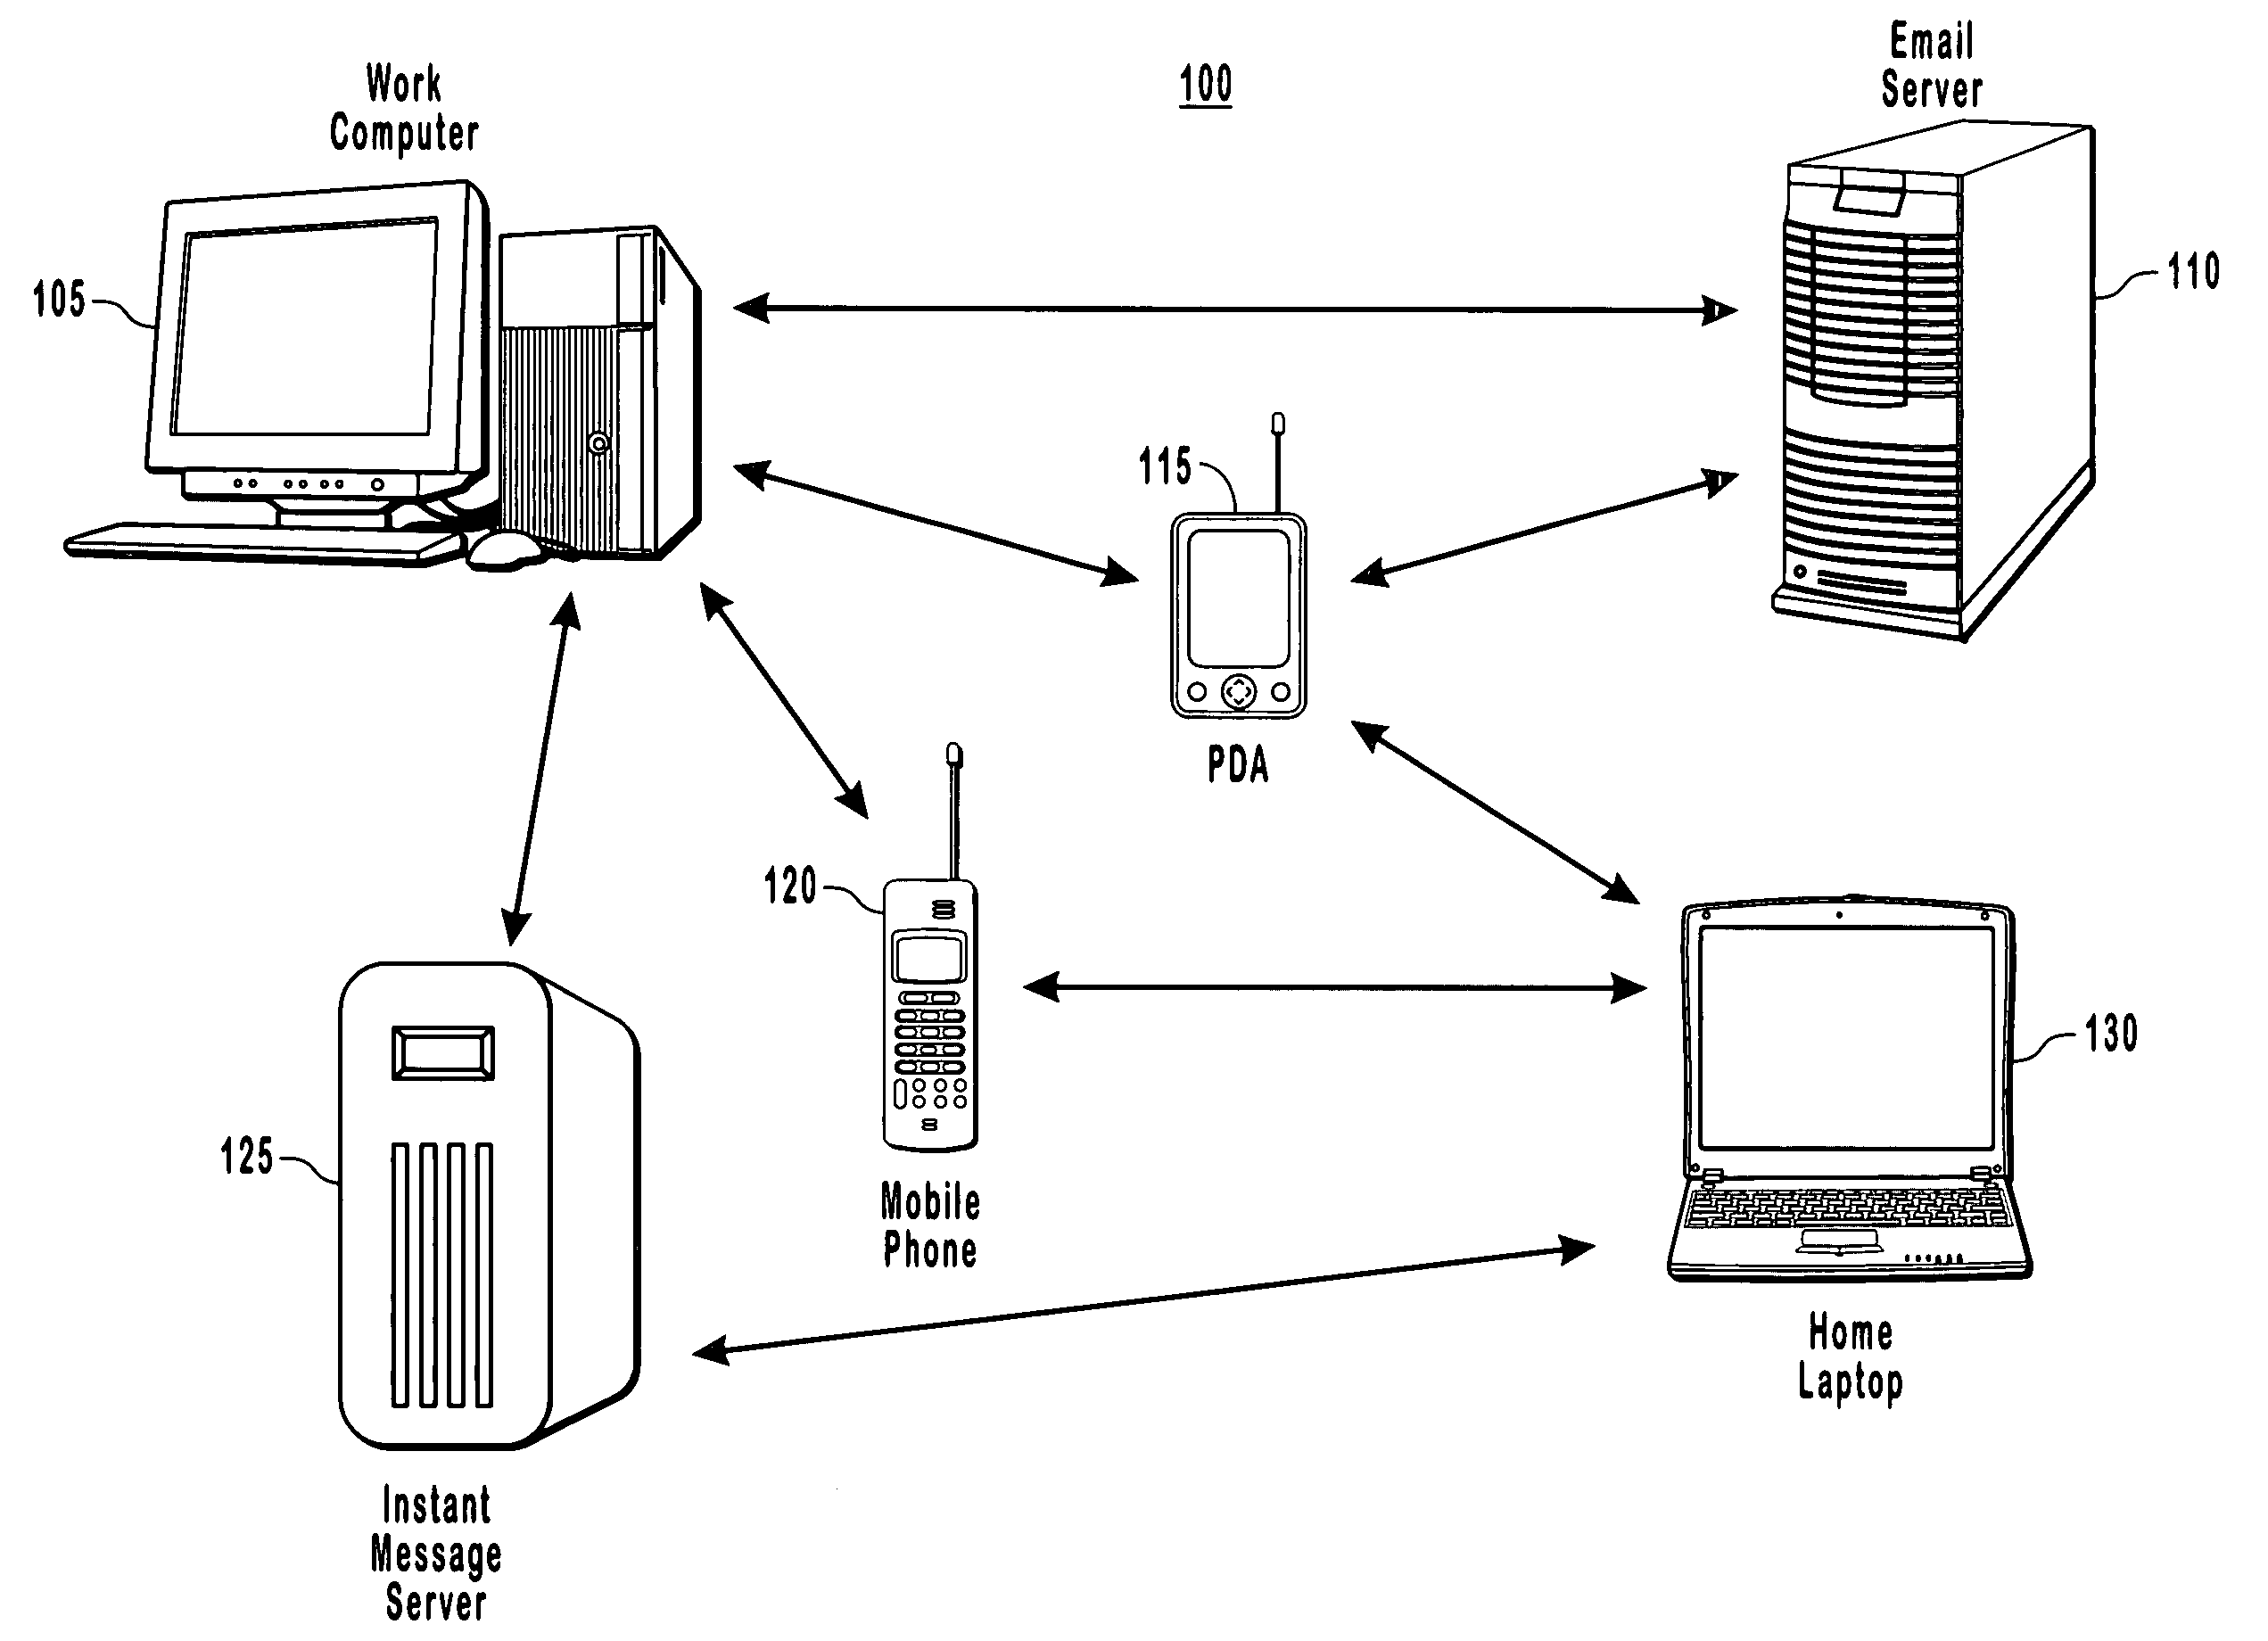 Methods and systems for halting synchronization loops in a distributed system